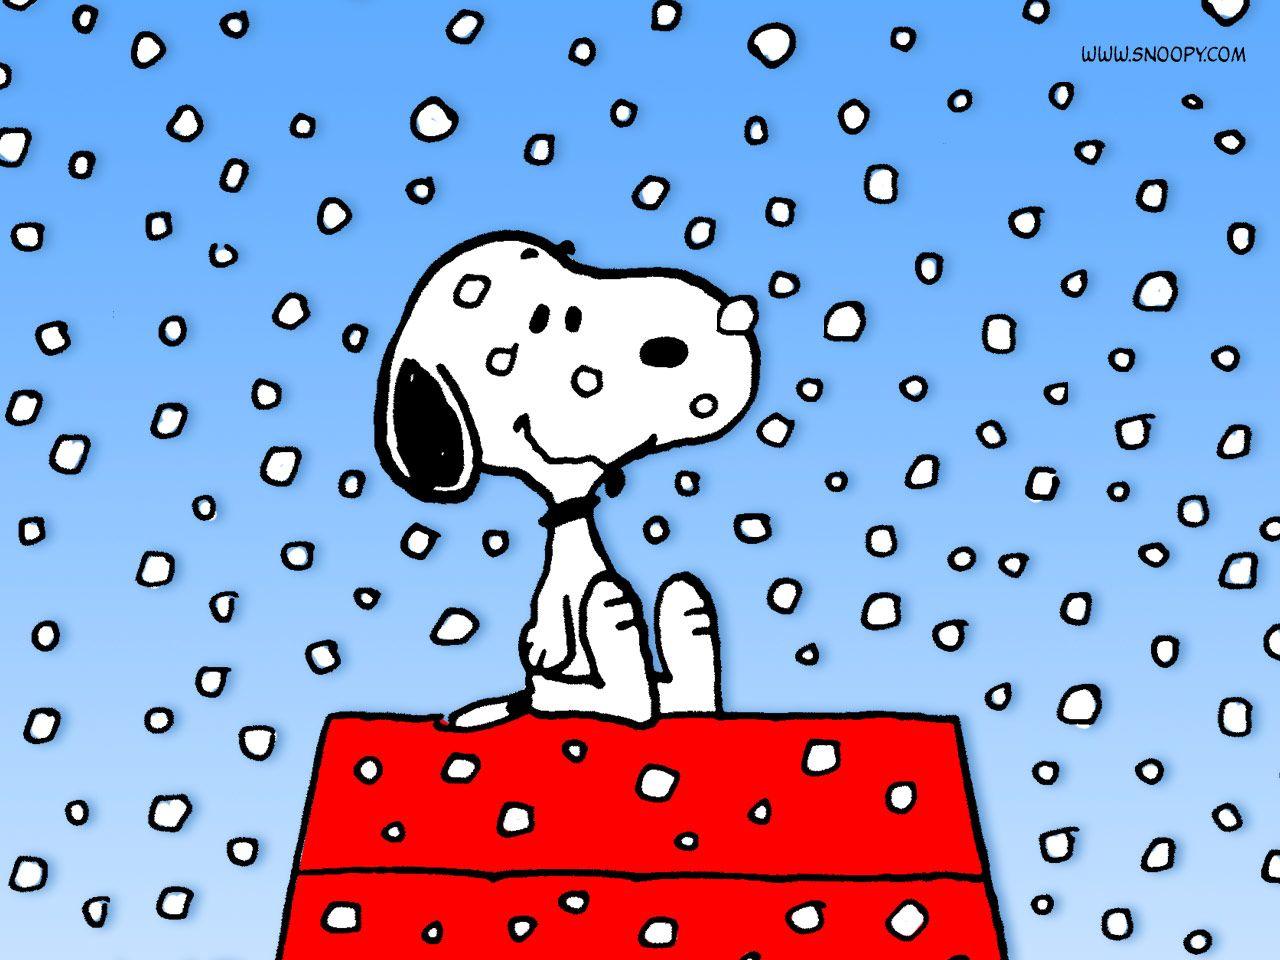 Snoopy Winter Wallpapers